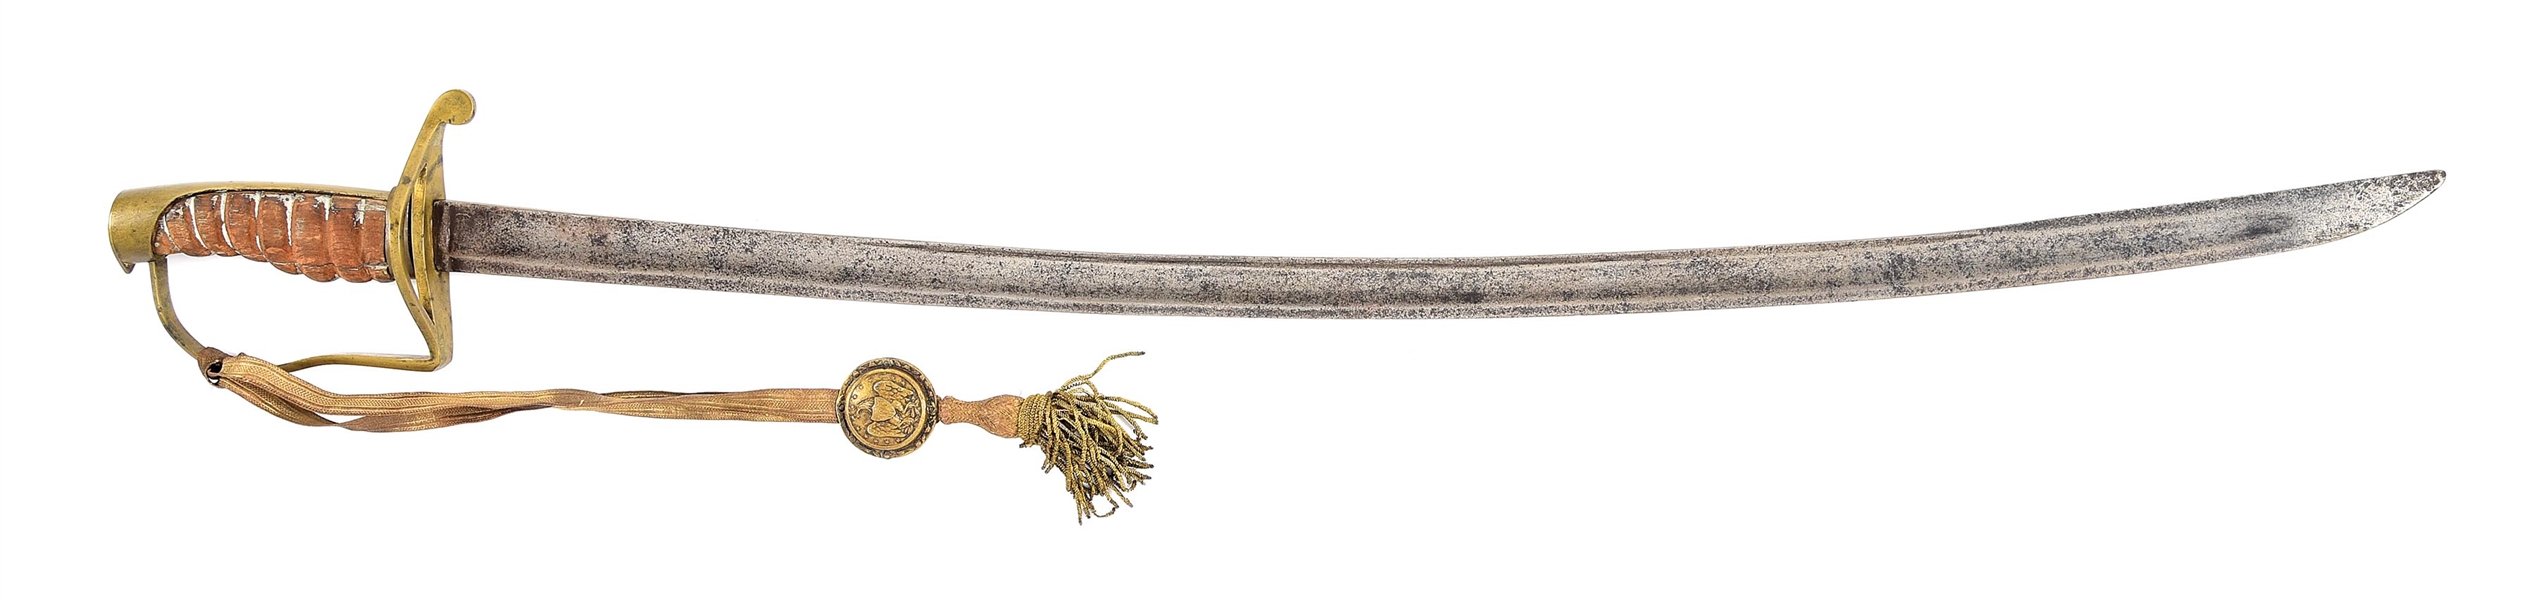 WAR OF 1812 ENLISTED MANS CAVALRY SABER ATTRIBUTED TO MOSES LUGENBEEL.